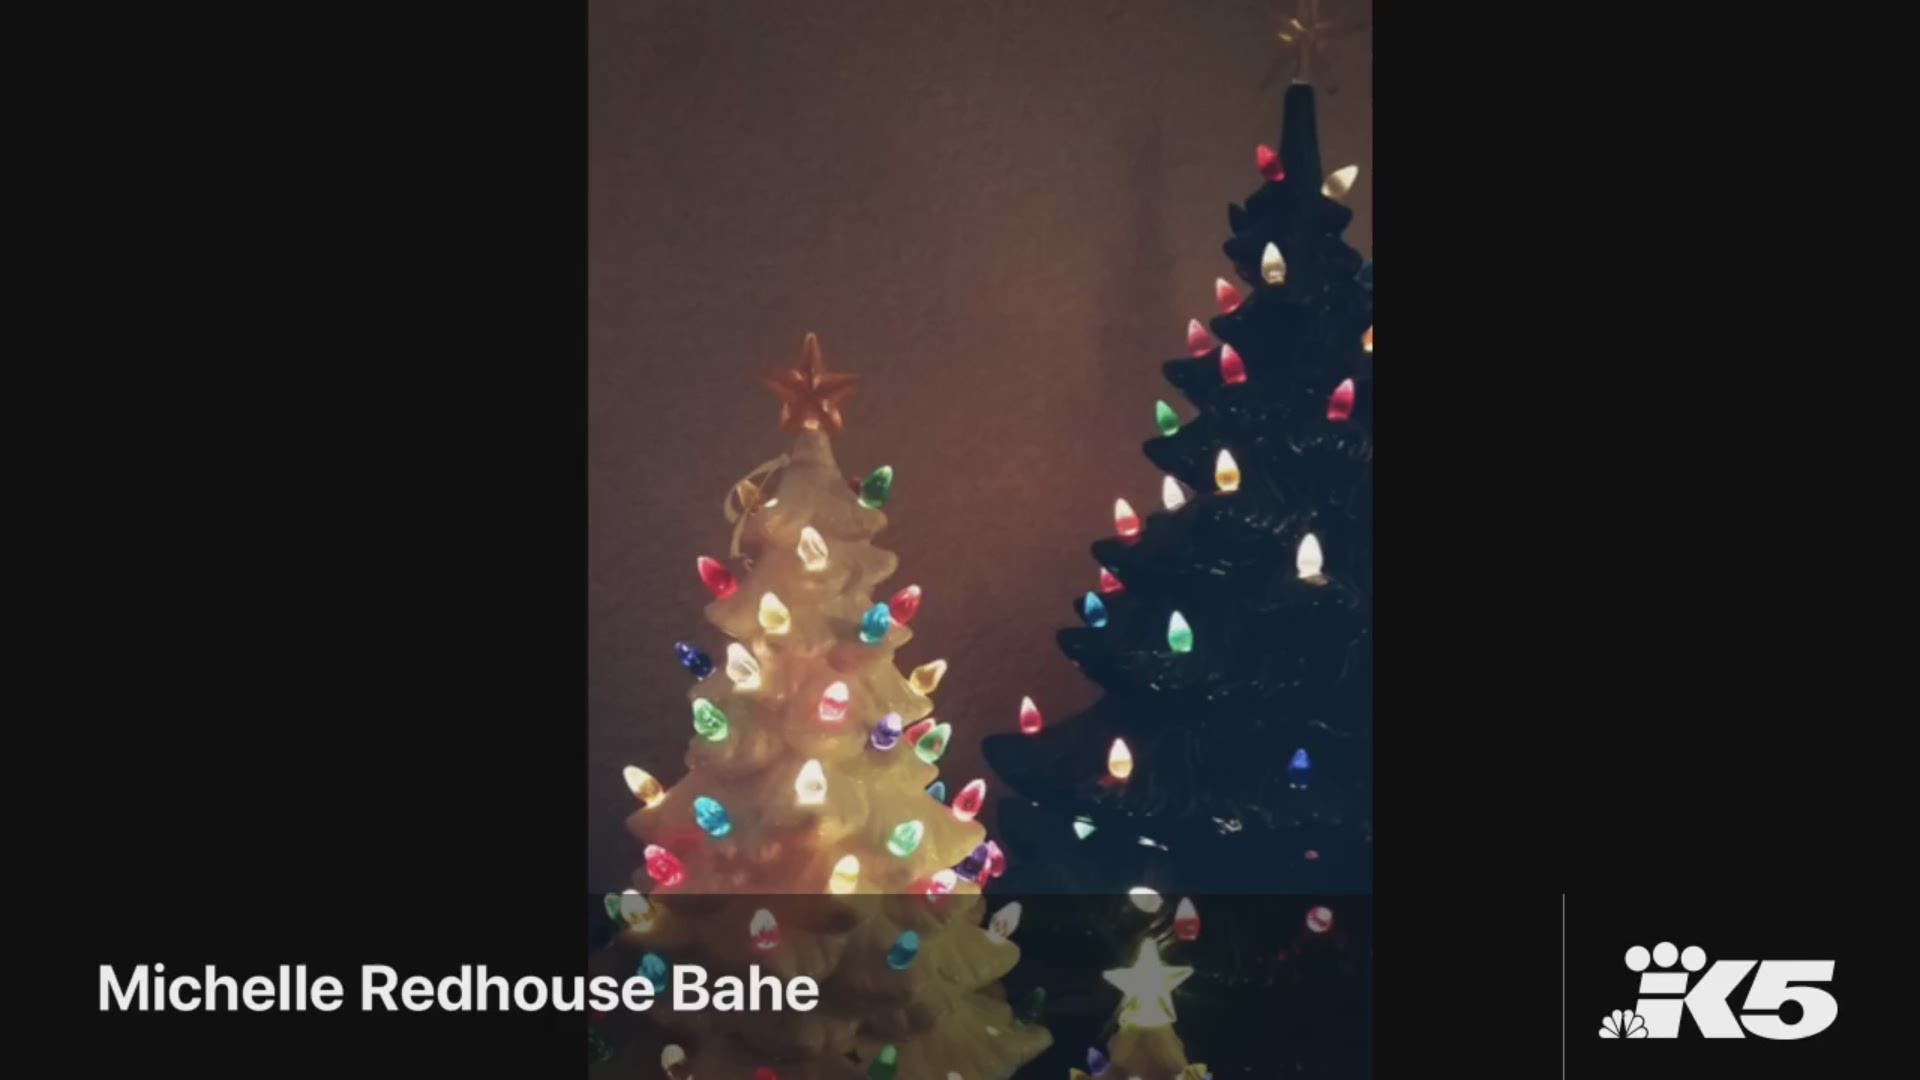 KING 5 viewers share photos of their ceramic Christmas trees.